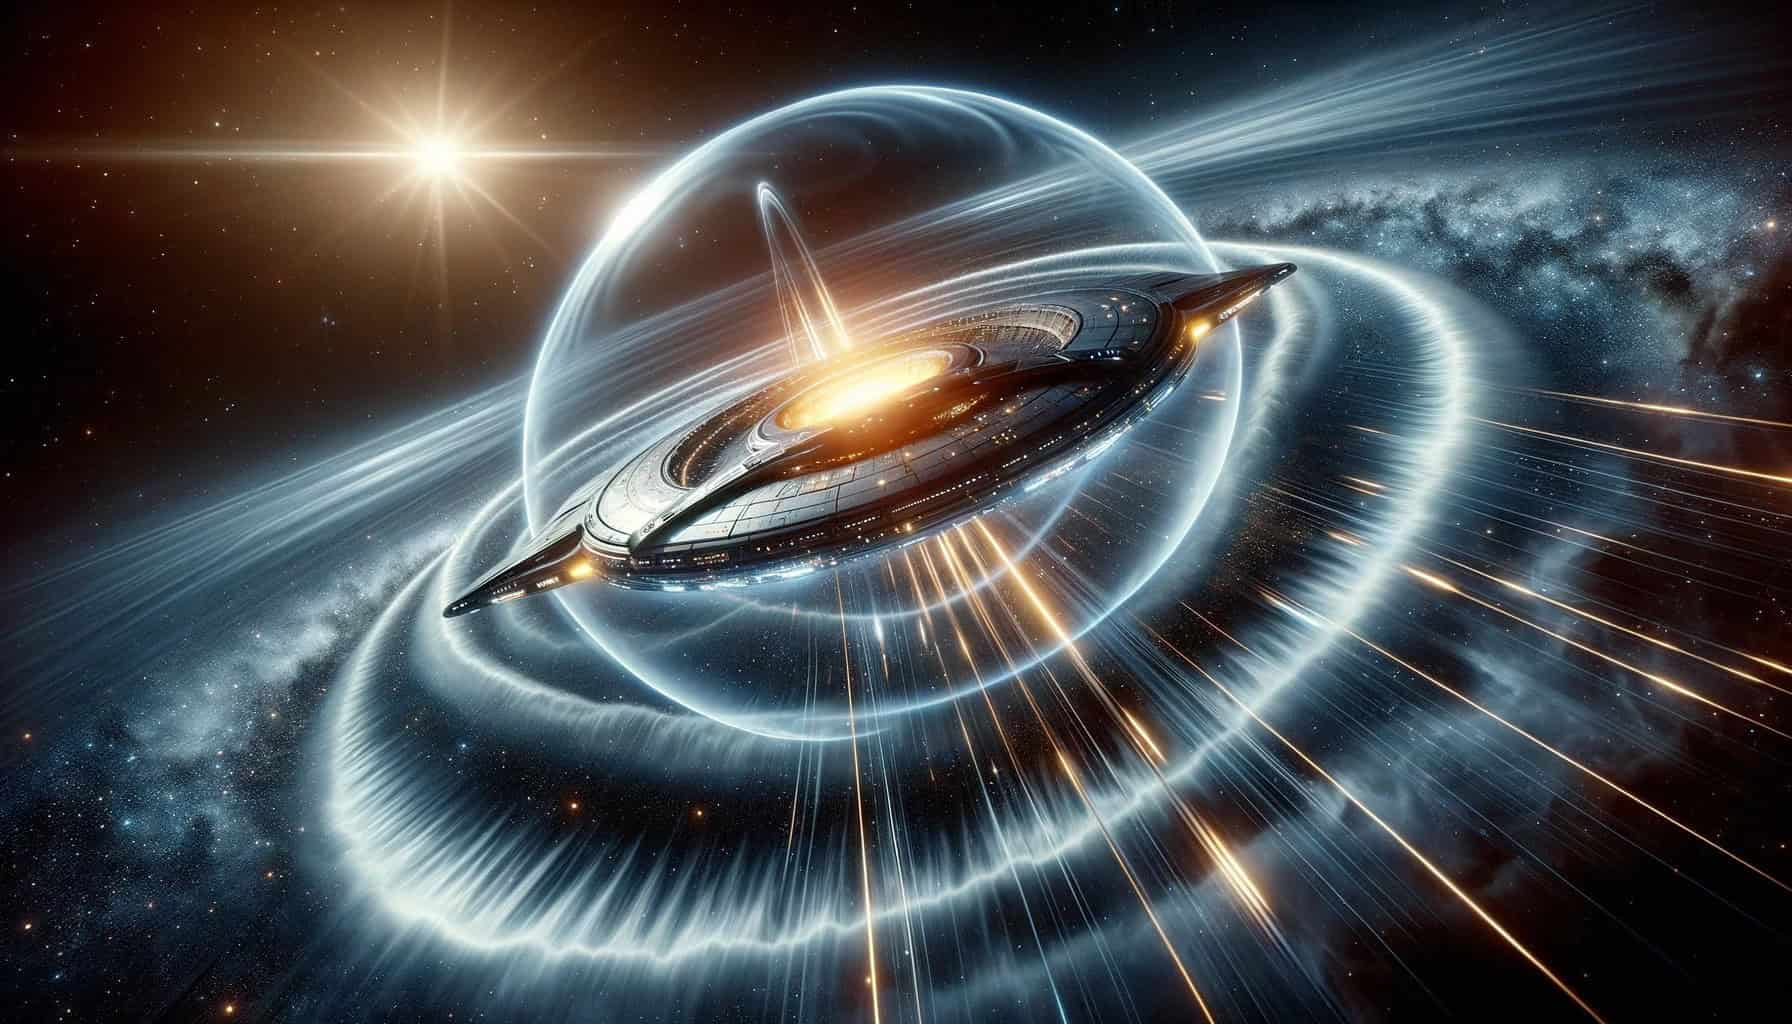 Illustration of futuristic spacecraft surrounded by a glowing warp bubble in space